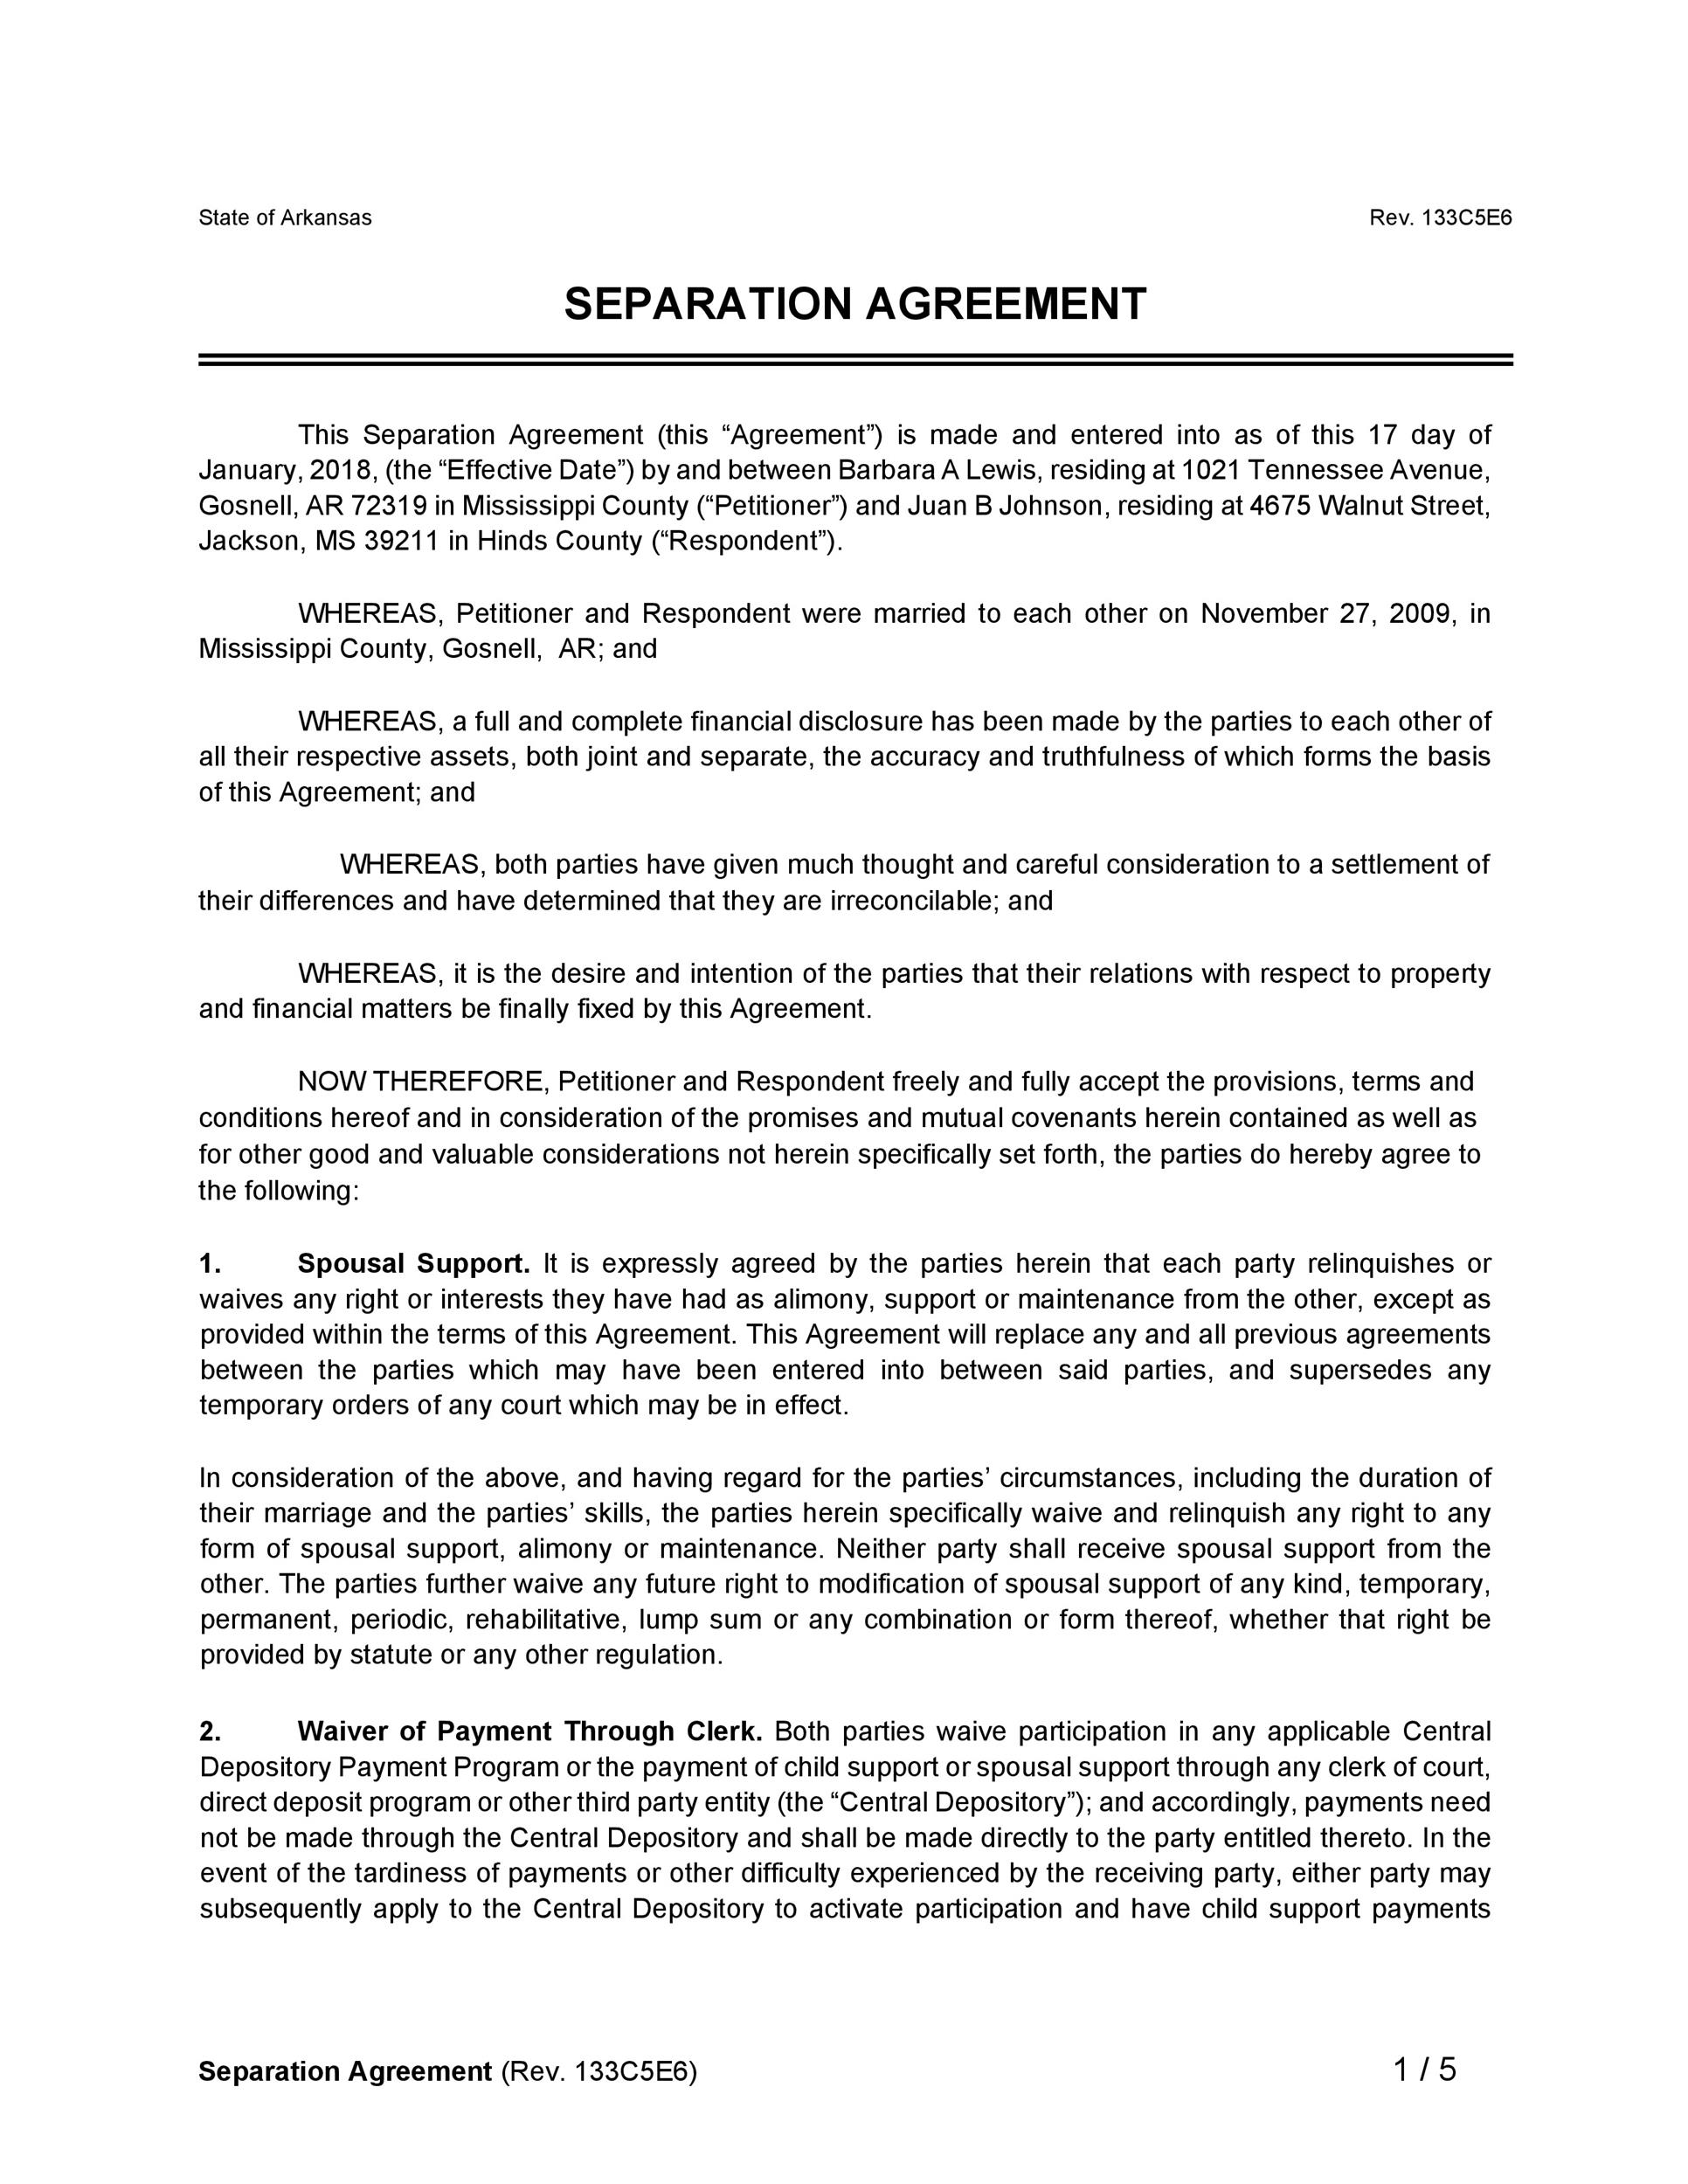 Mutual Separation Agreement Template Malaysia Master of